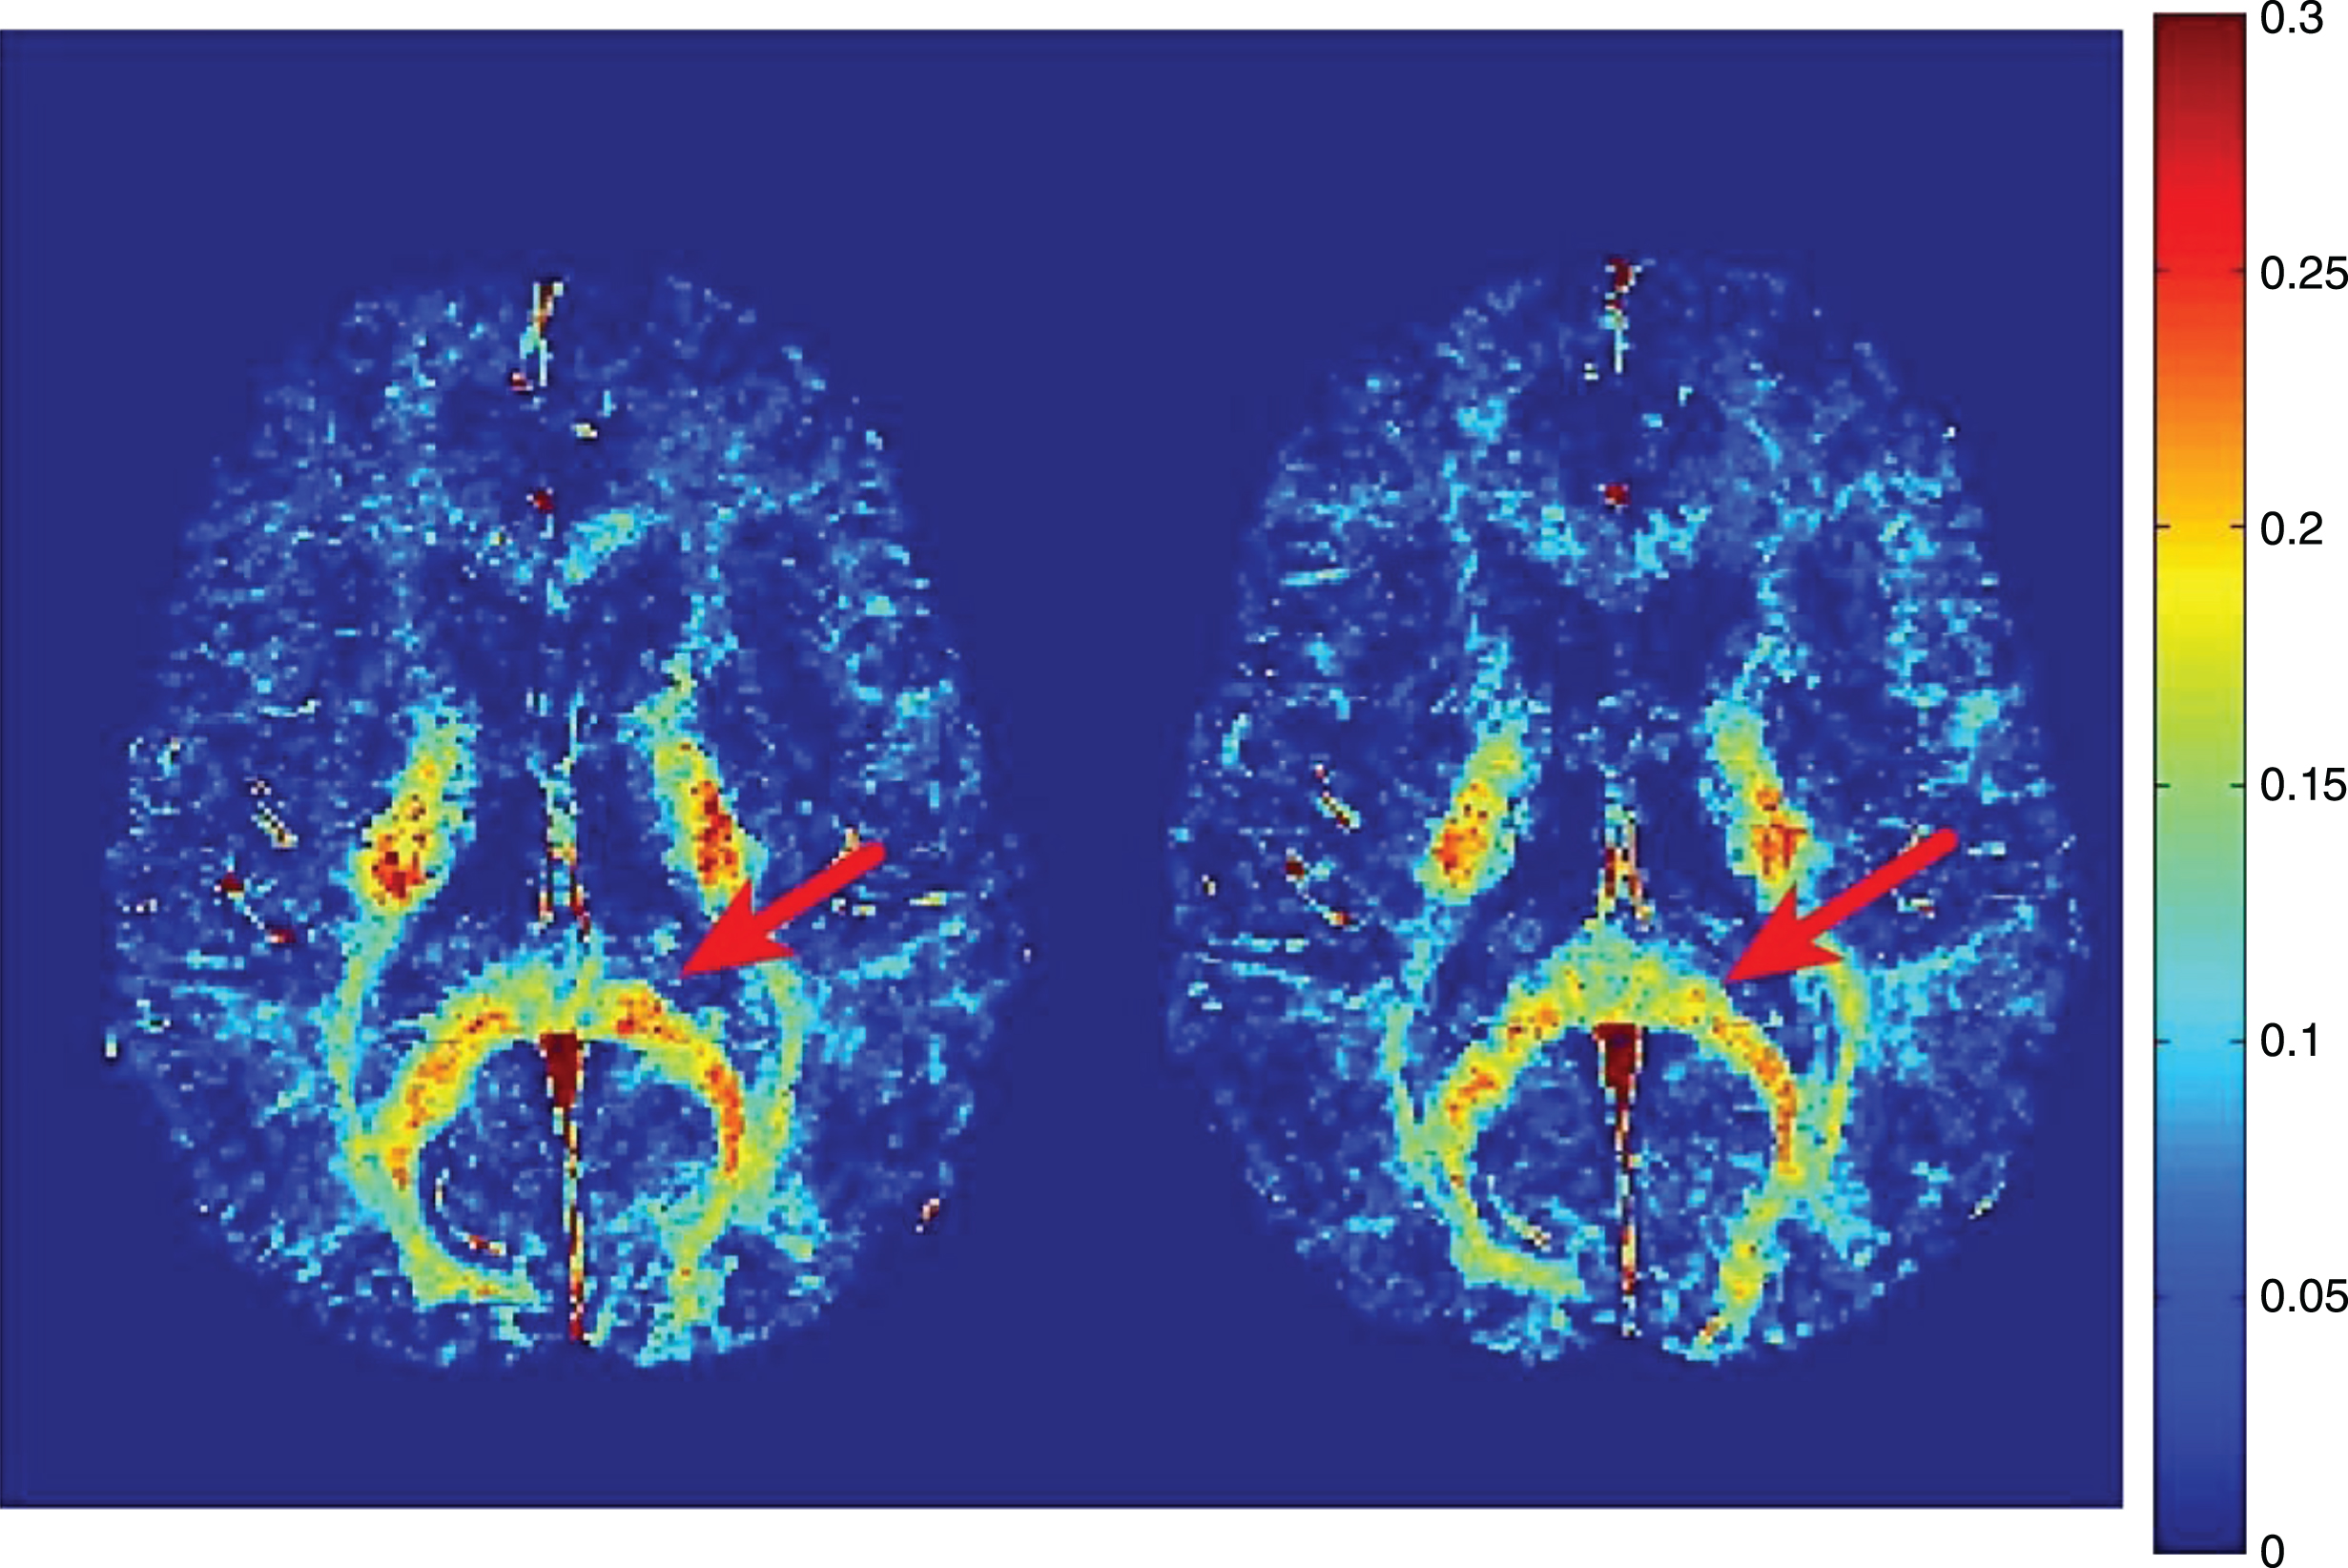 Representative myelin water fraction maps. Myelin water fraction maps from a concussed athlete at baseline (left) and two weeks post-injury (right). Myelin water fraction is measured as the T2-signal from 0–40ms divided by the total T2 signal. A region of the corpus callosum with visible reduction in MWF post-injury is highlighted by the red arrow (Fig. 1, Wright AD, Jarrett M, Vavasour I, Shahinfard E, Kolind S, van Donkelaar P, et al. Myelin Water Fraction Is Transiently Reduced after a Single Mild Traumatic Brain Injury - A Prospective Cohort Study in Collegiate Hockey Players. PLoS One. 2016;11(2):e0150215).